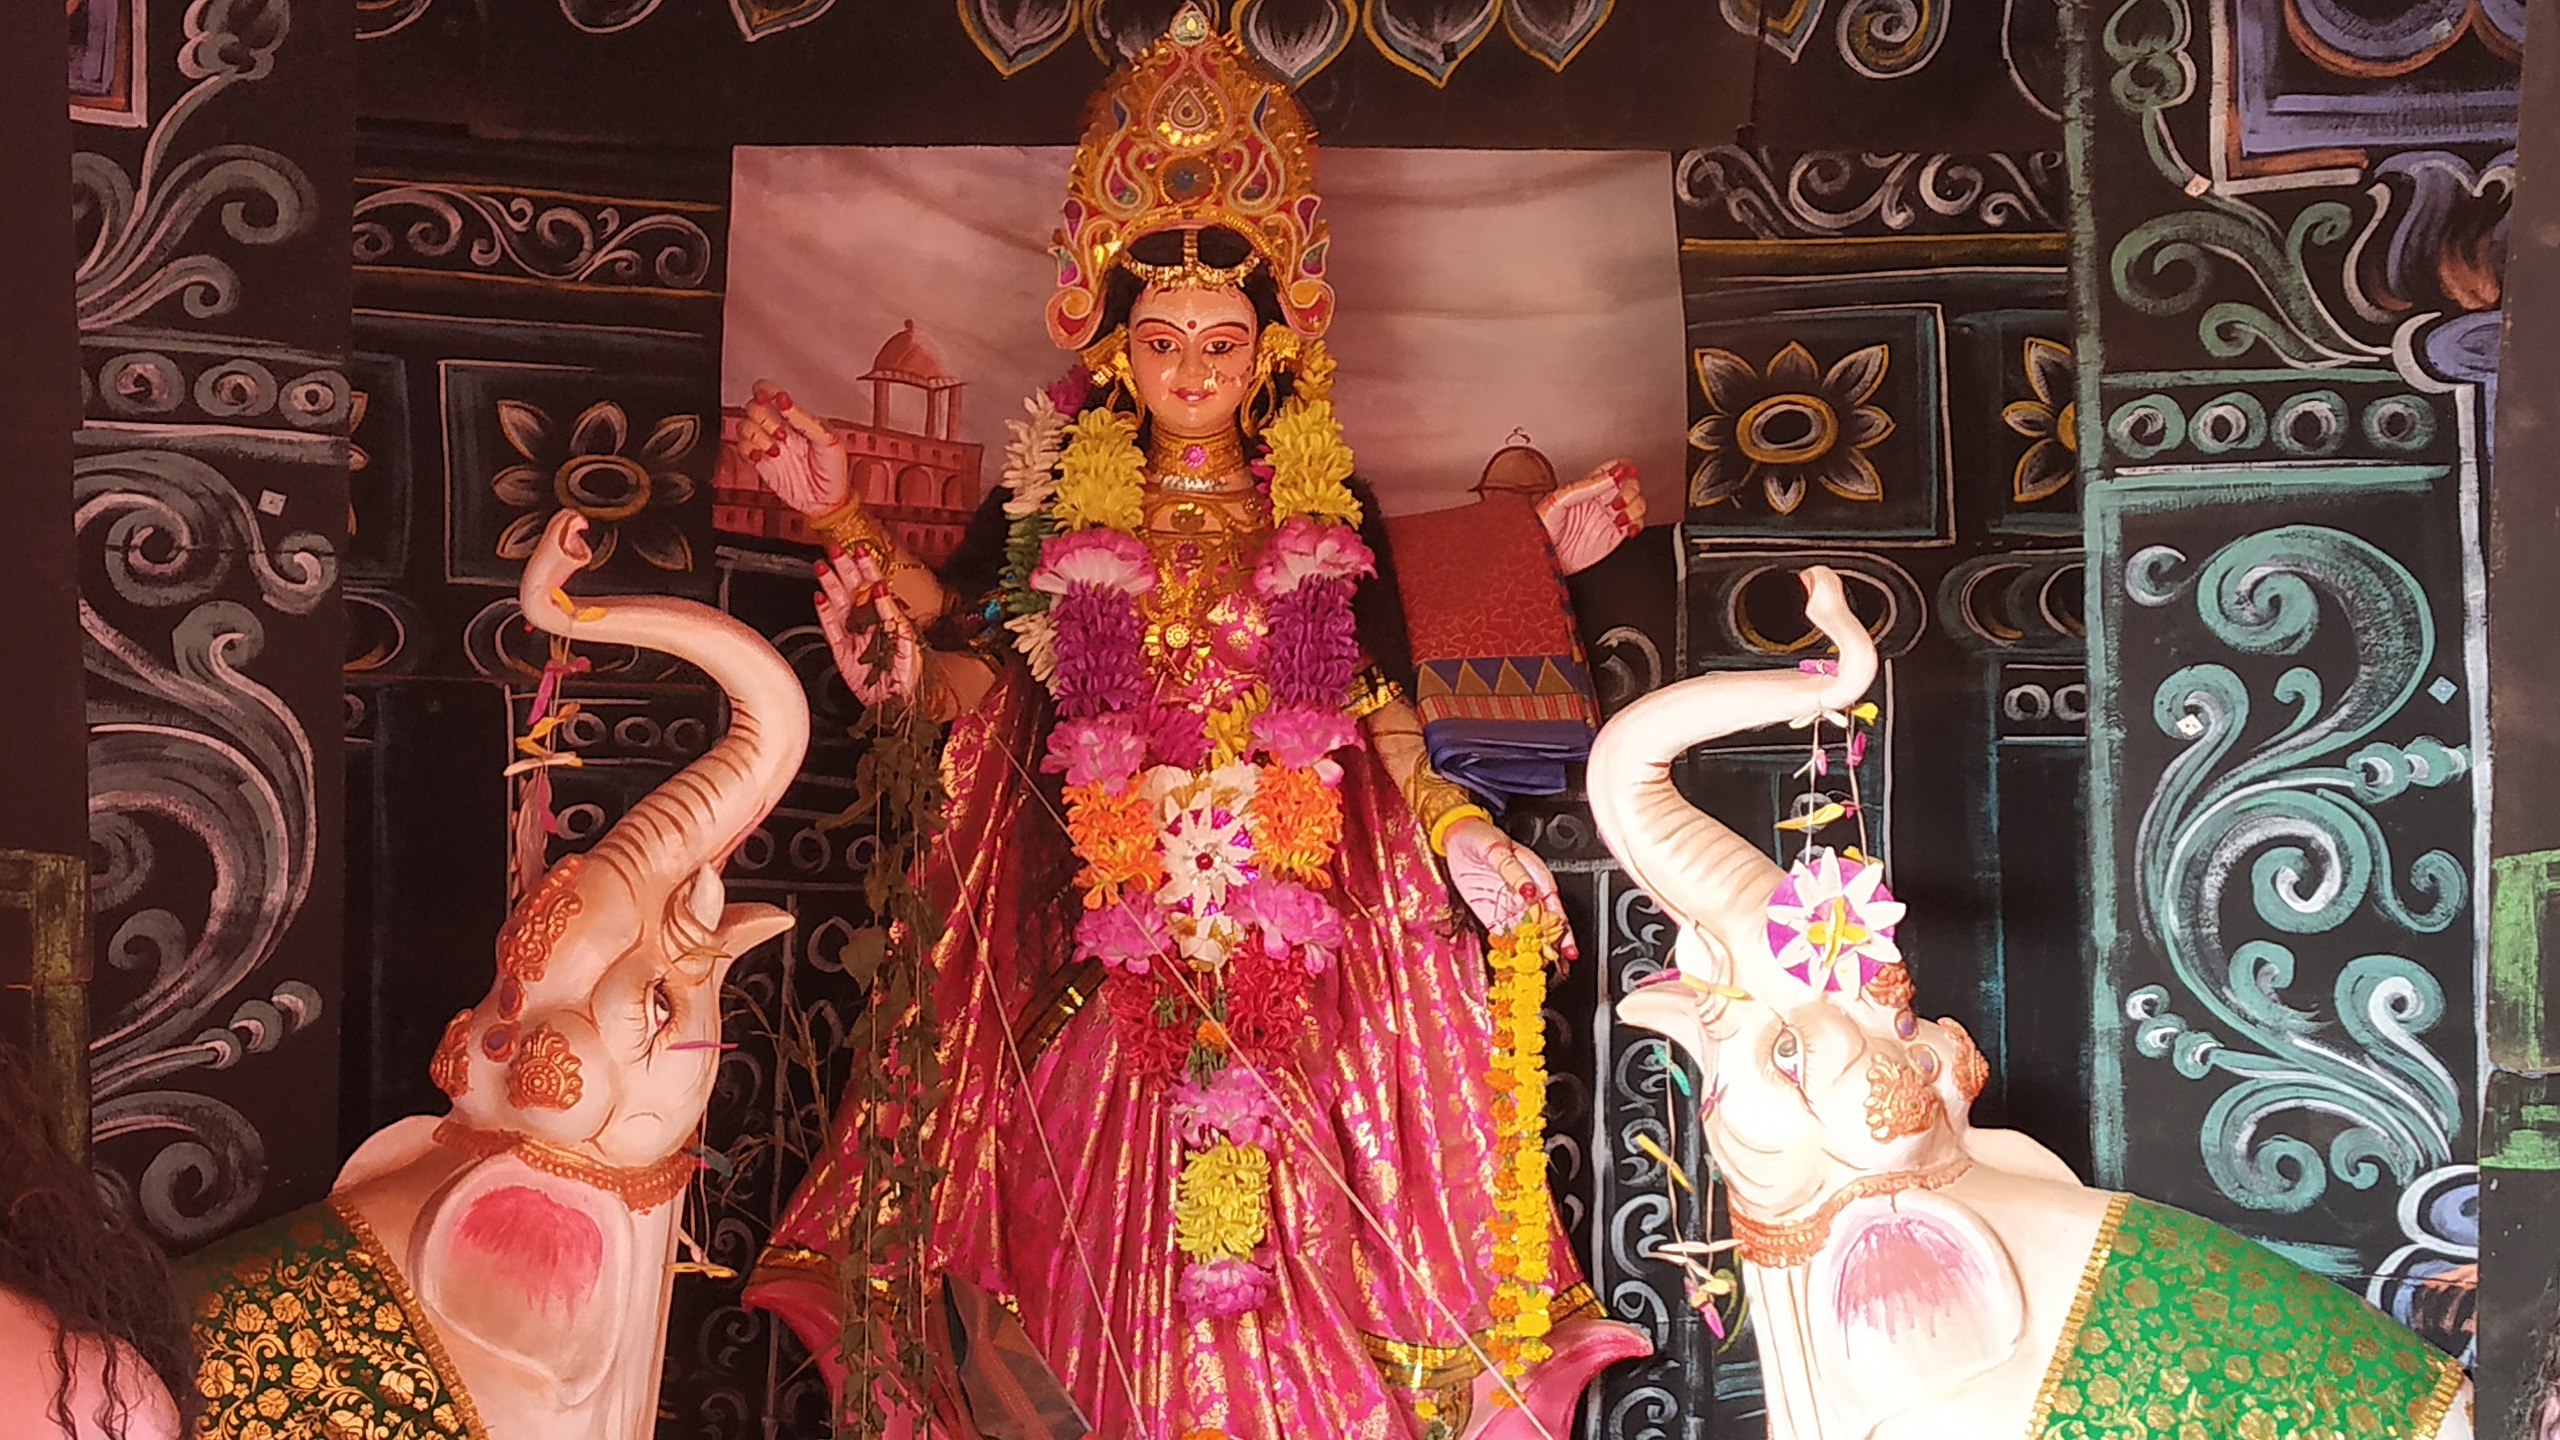 The main puja of Diwali is the Lakshmi puja, which is dedicated to the goddess of wealth.